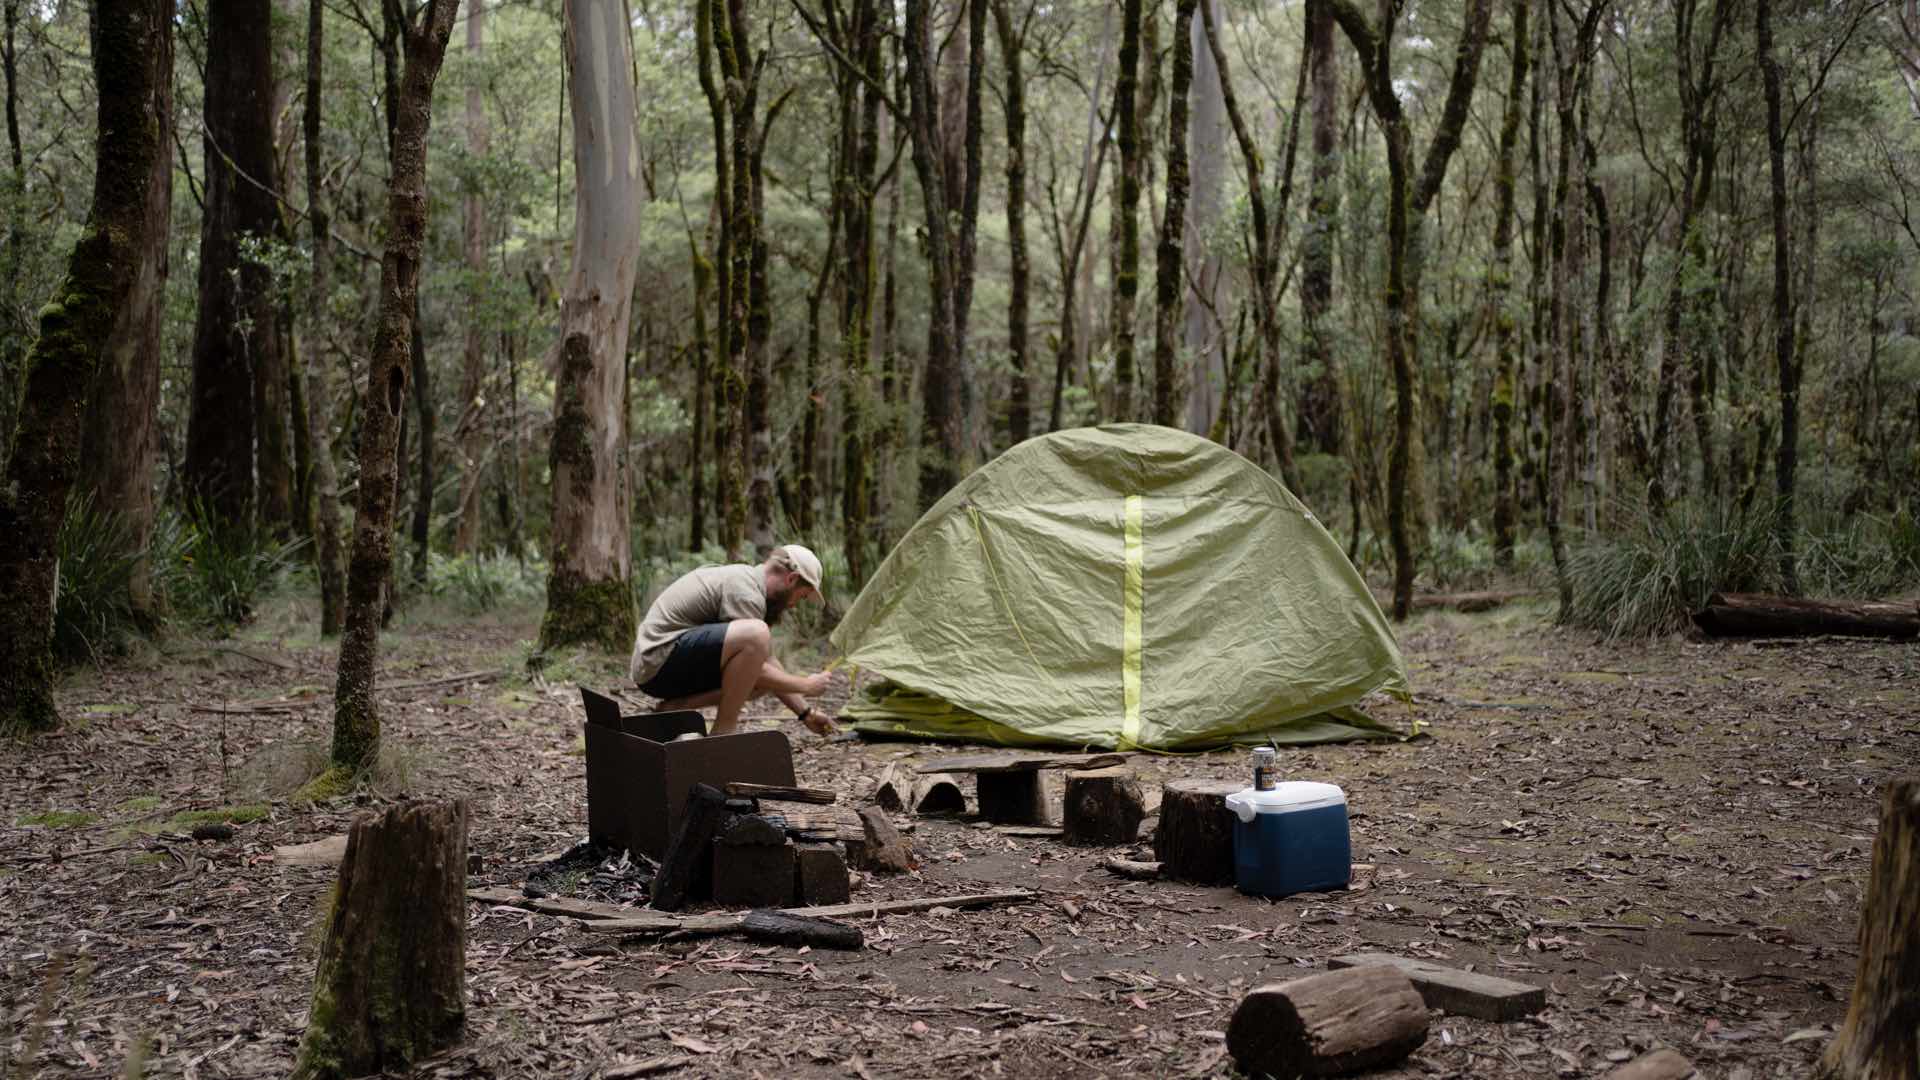 Man setting up tent at campsite